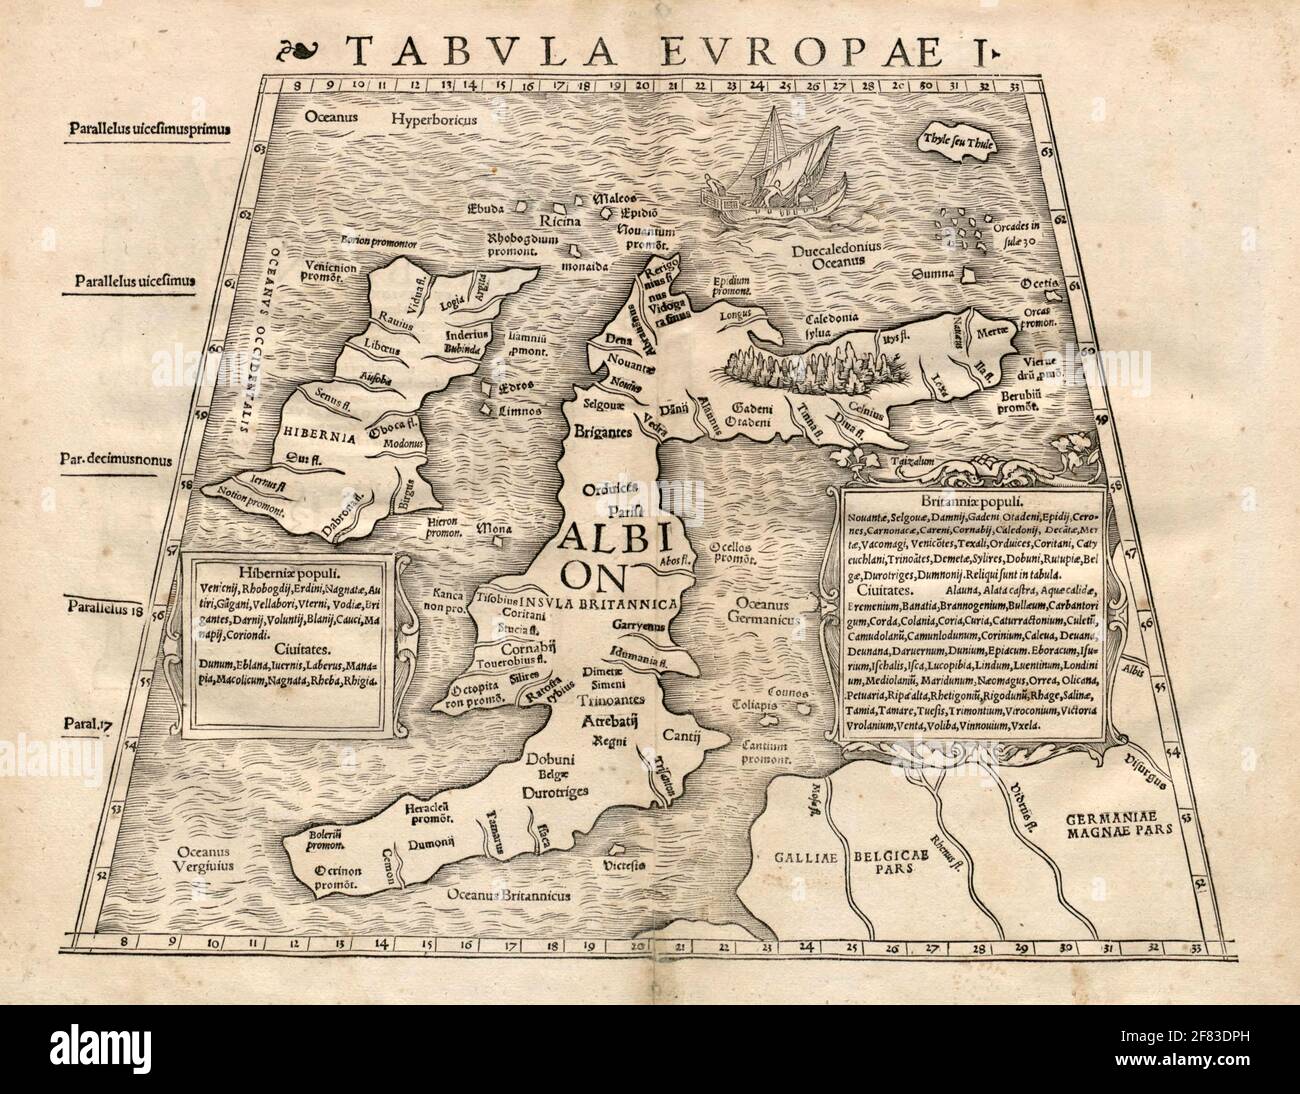 Beautiful vintage hand drawn map illustration of Europe from Geographia Universalis, Vetus et Nova from 1542. It shown known world until that time. Stock Photo